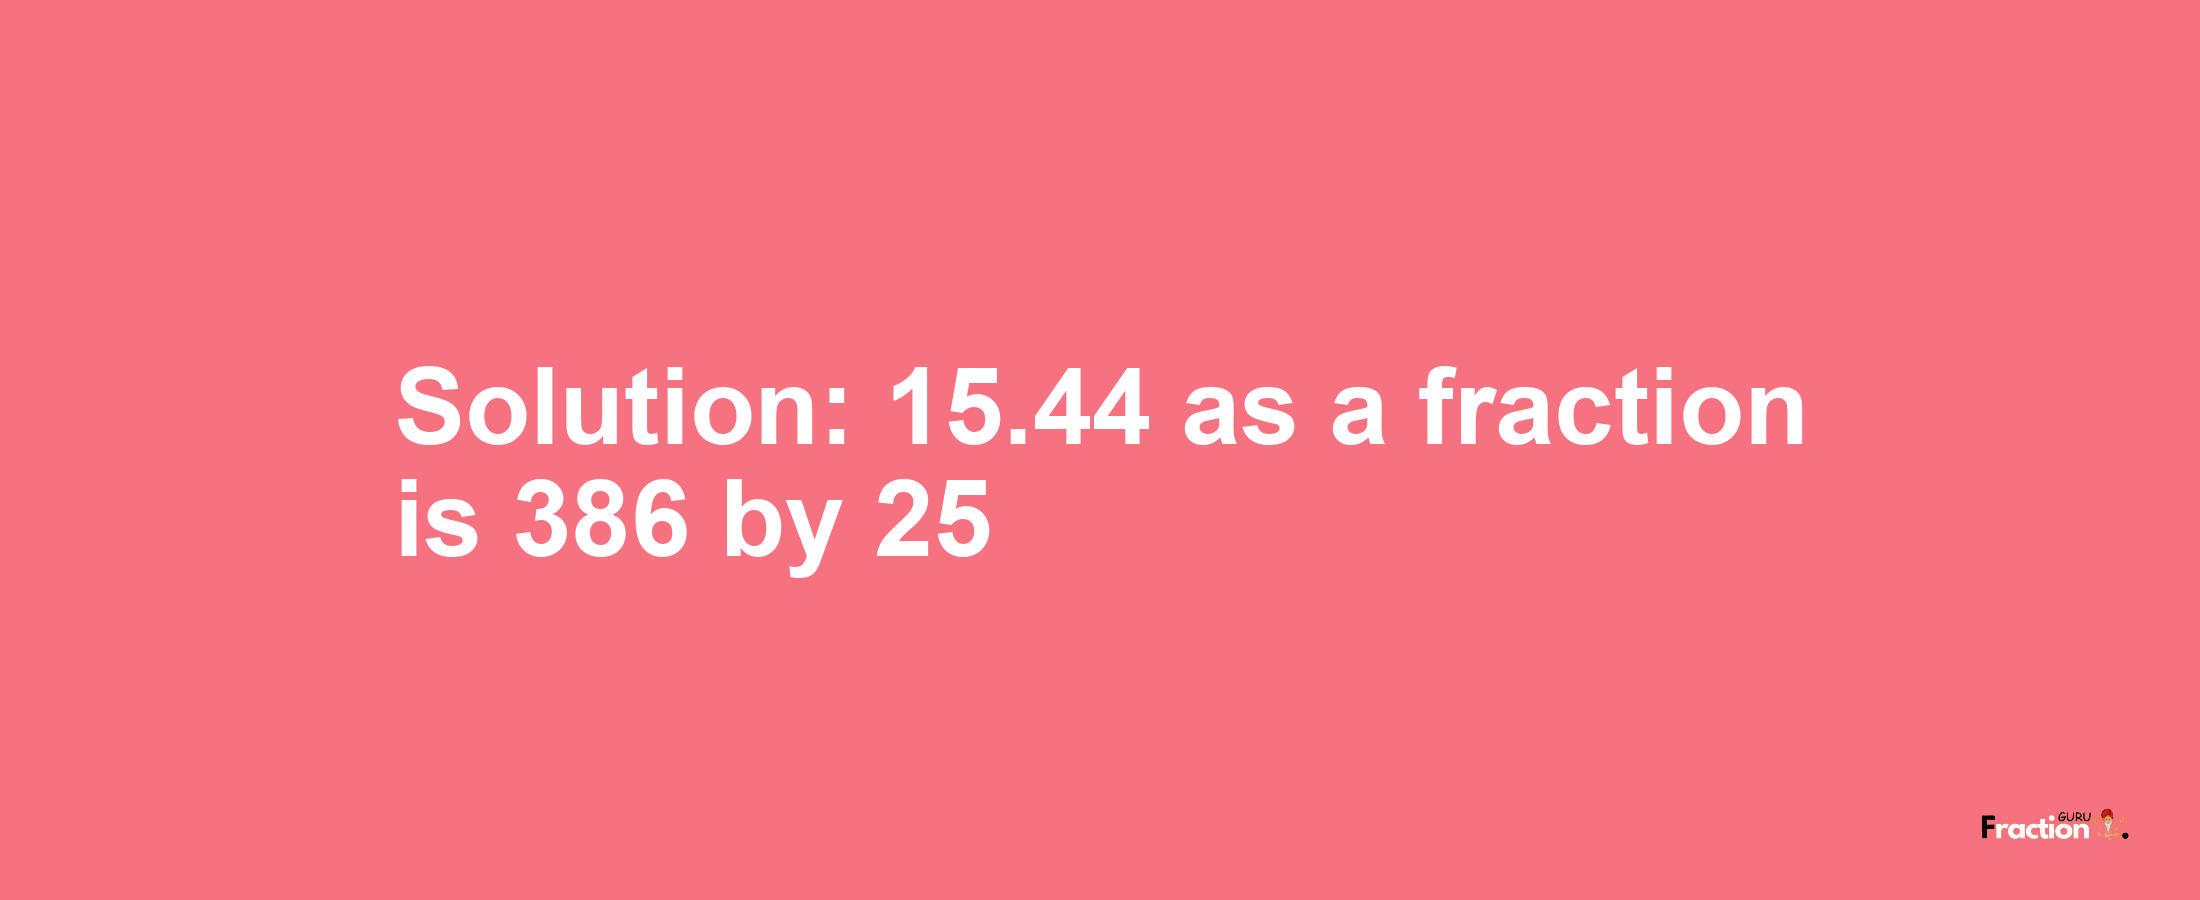 Solution:15.44 as a fraction is 386/25